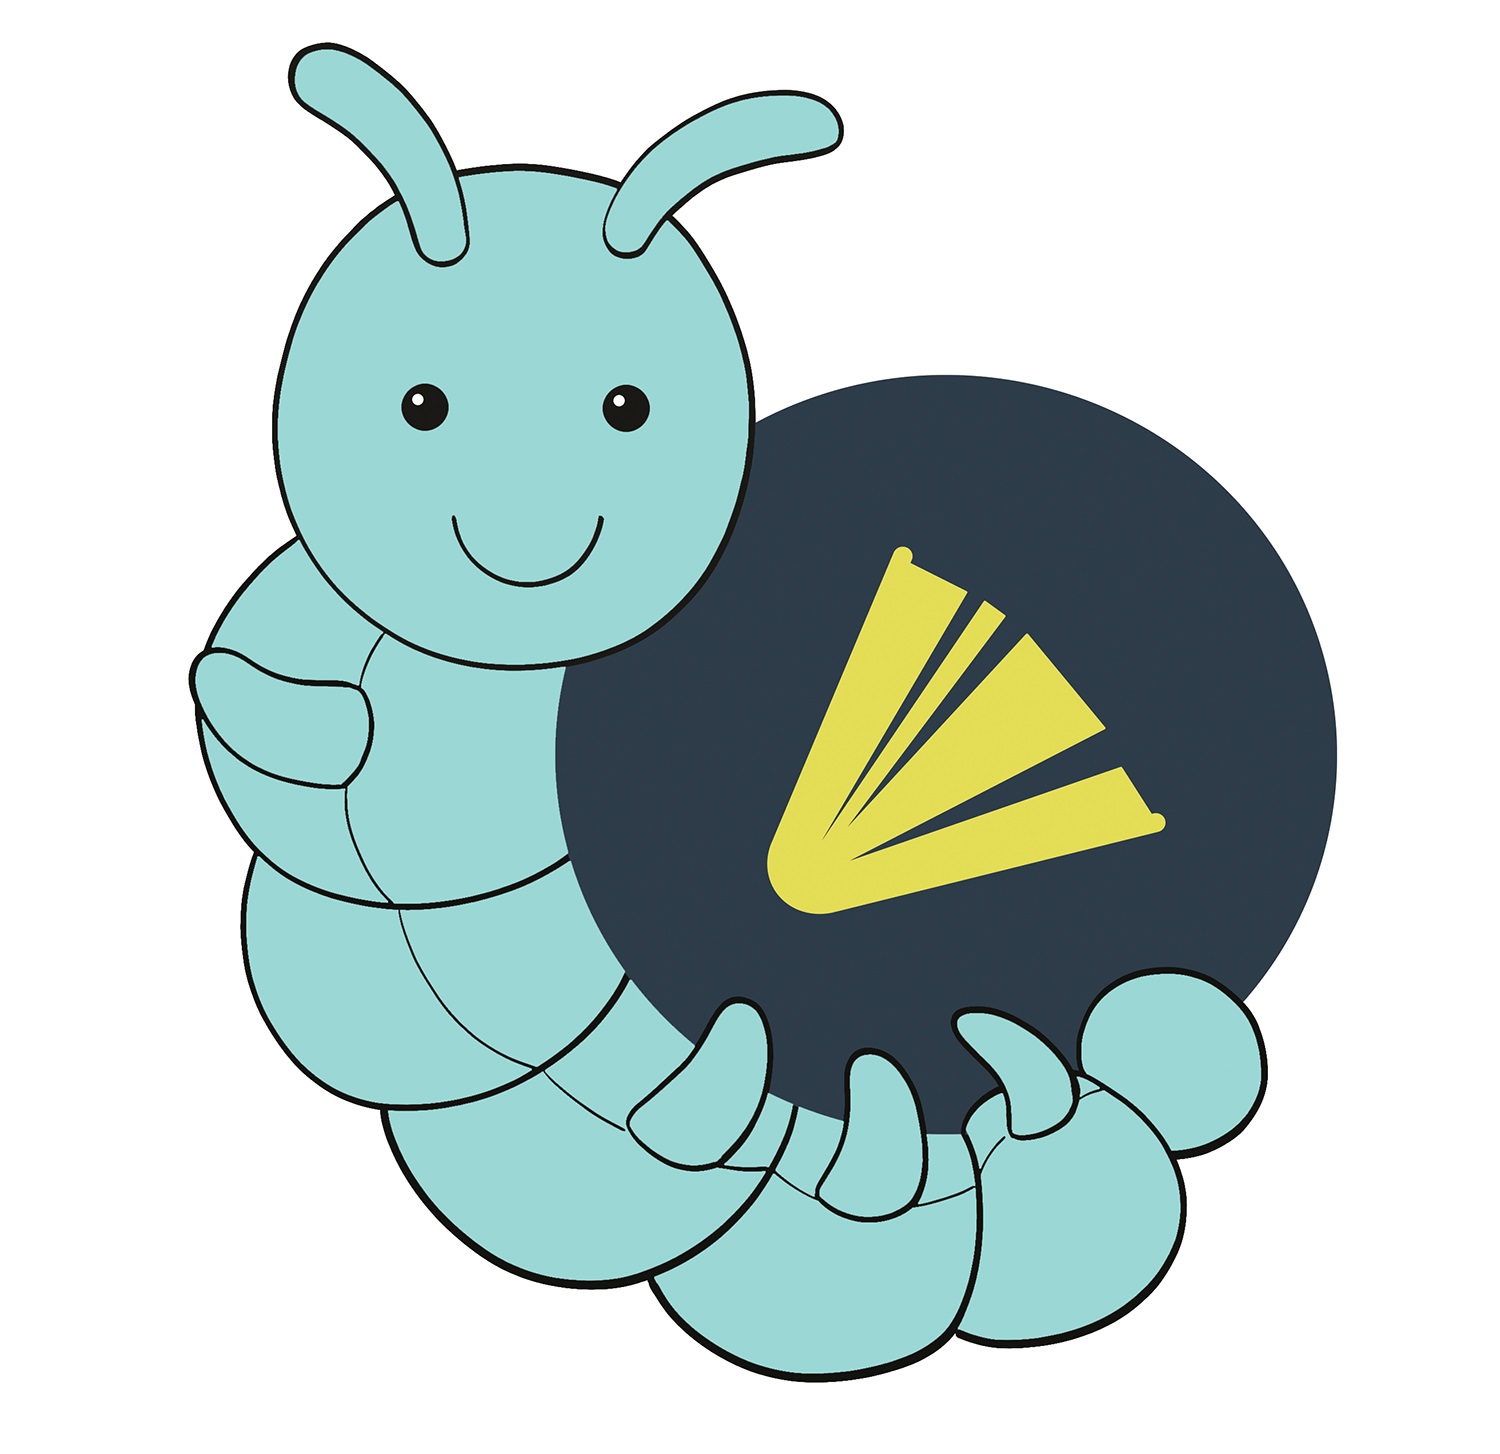 graphic of WCCLS mascot Wallace, a teal caterpillar holding a round WCCLS logo